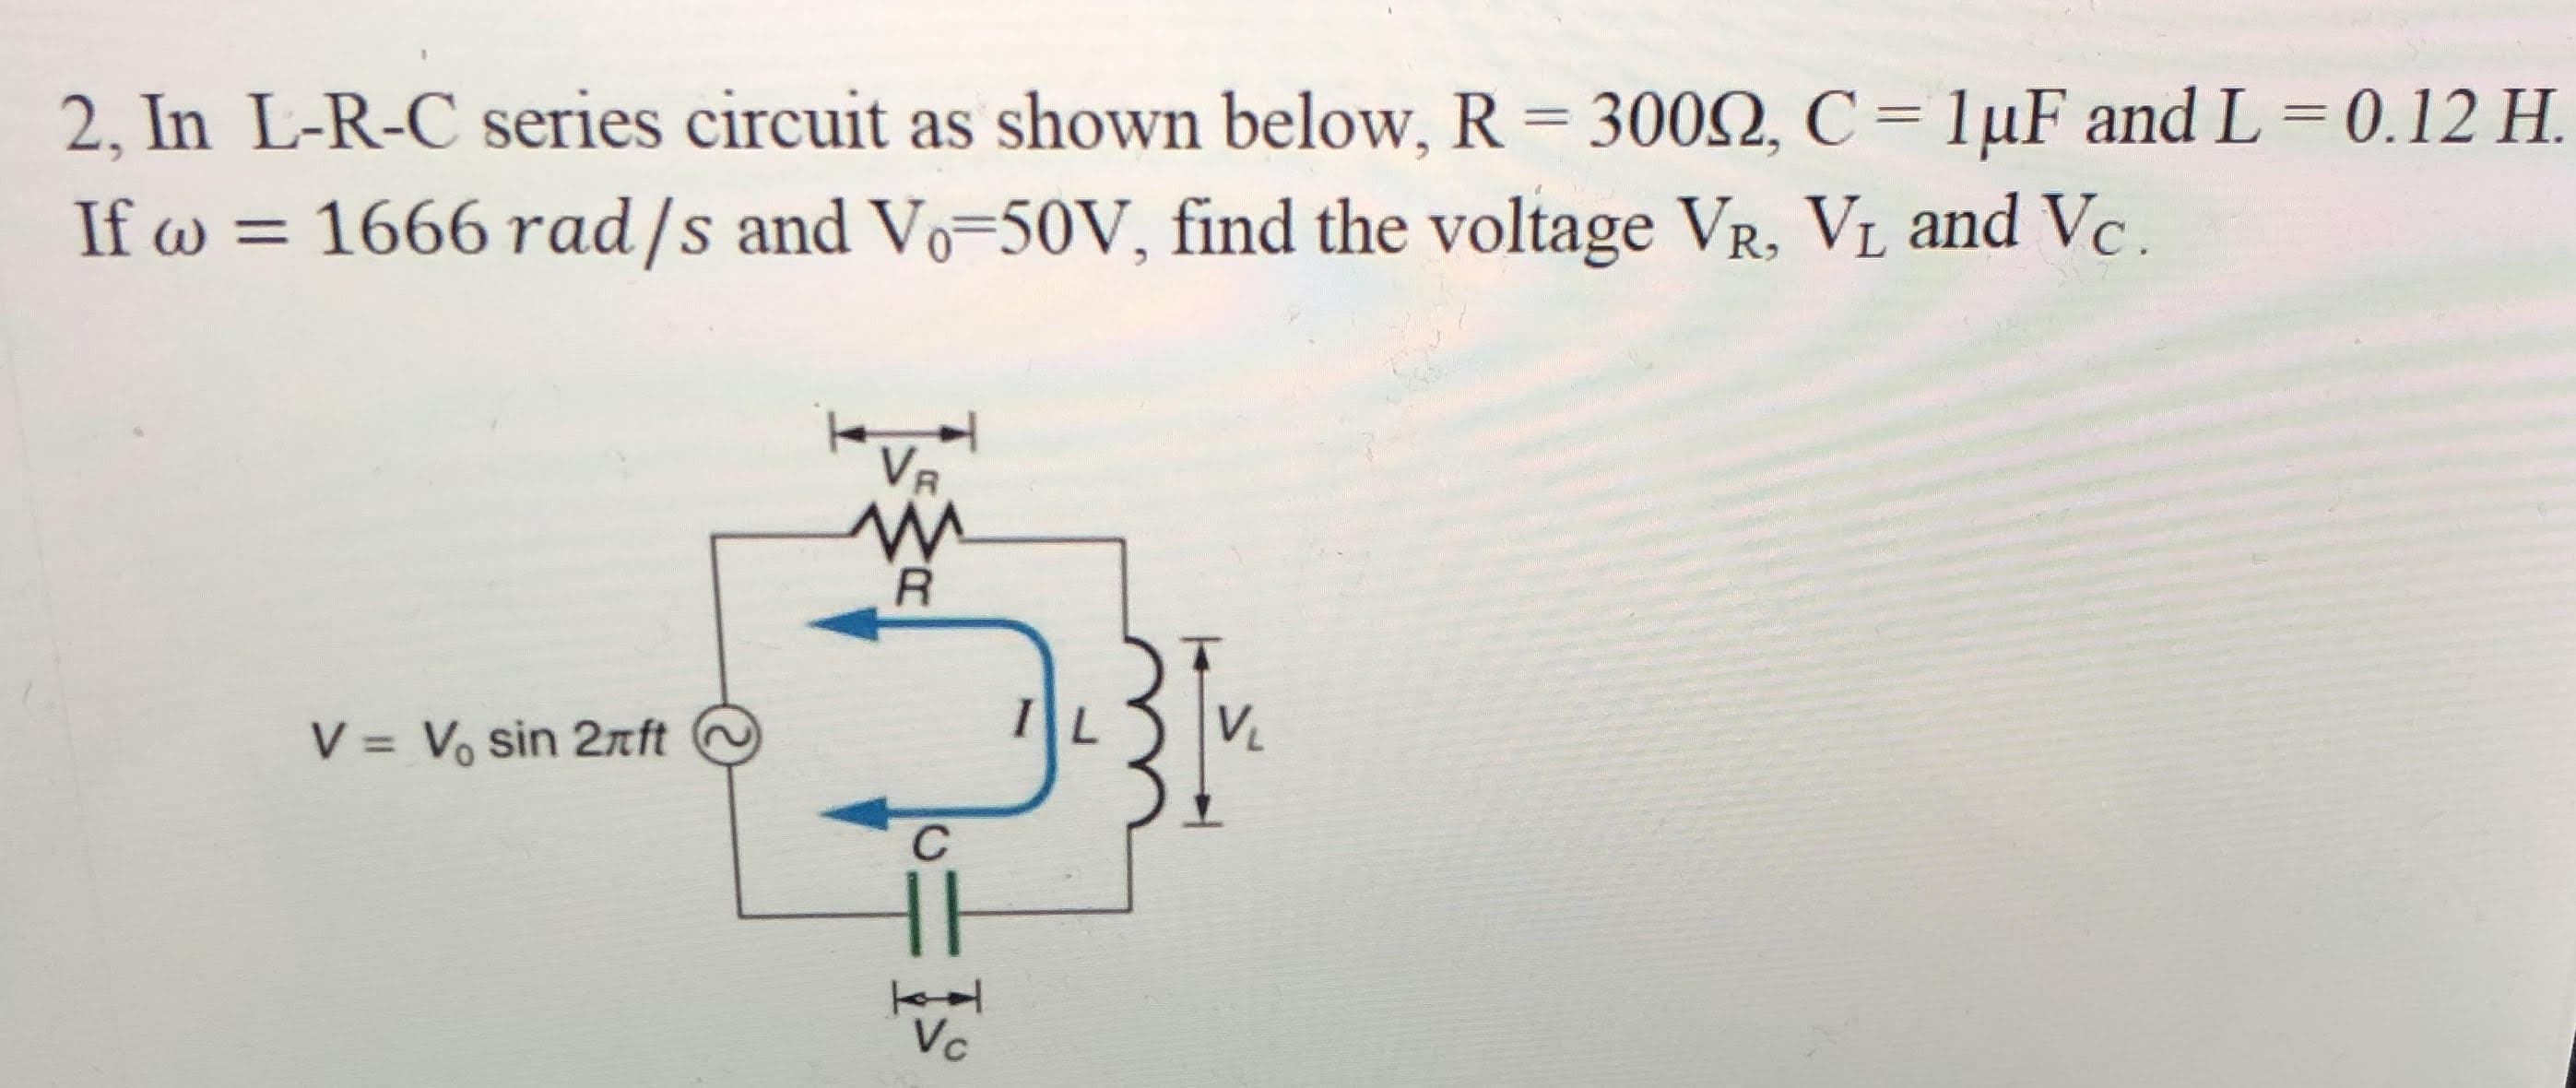 2, In L-R-C series circuit as shown below, R = 300Q, C = 1µF and L = 0.12 H.
If w = 1666 rad/s and Vo-50V, find the voltage VR. VL and Vc.
%3D
